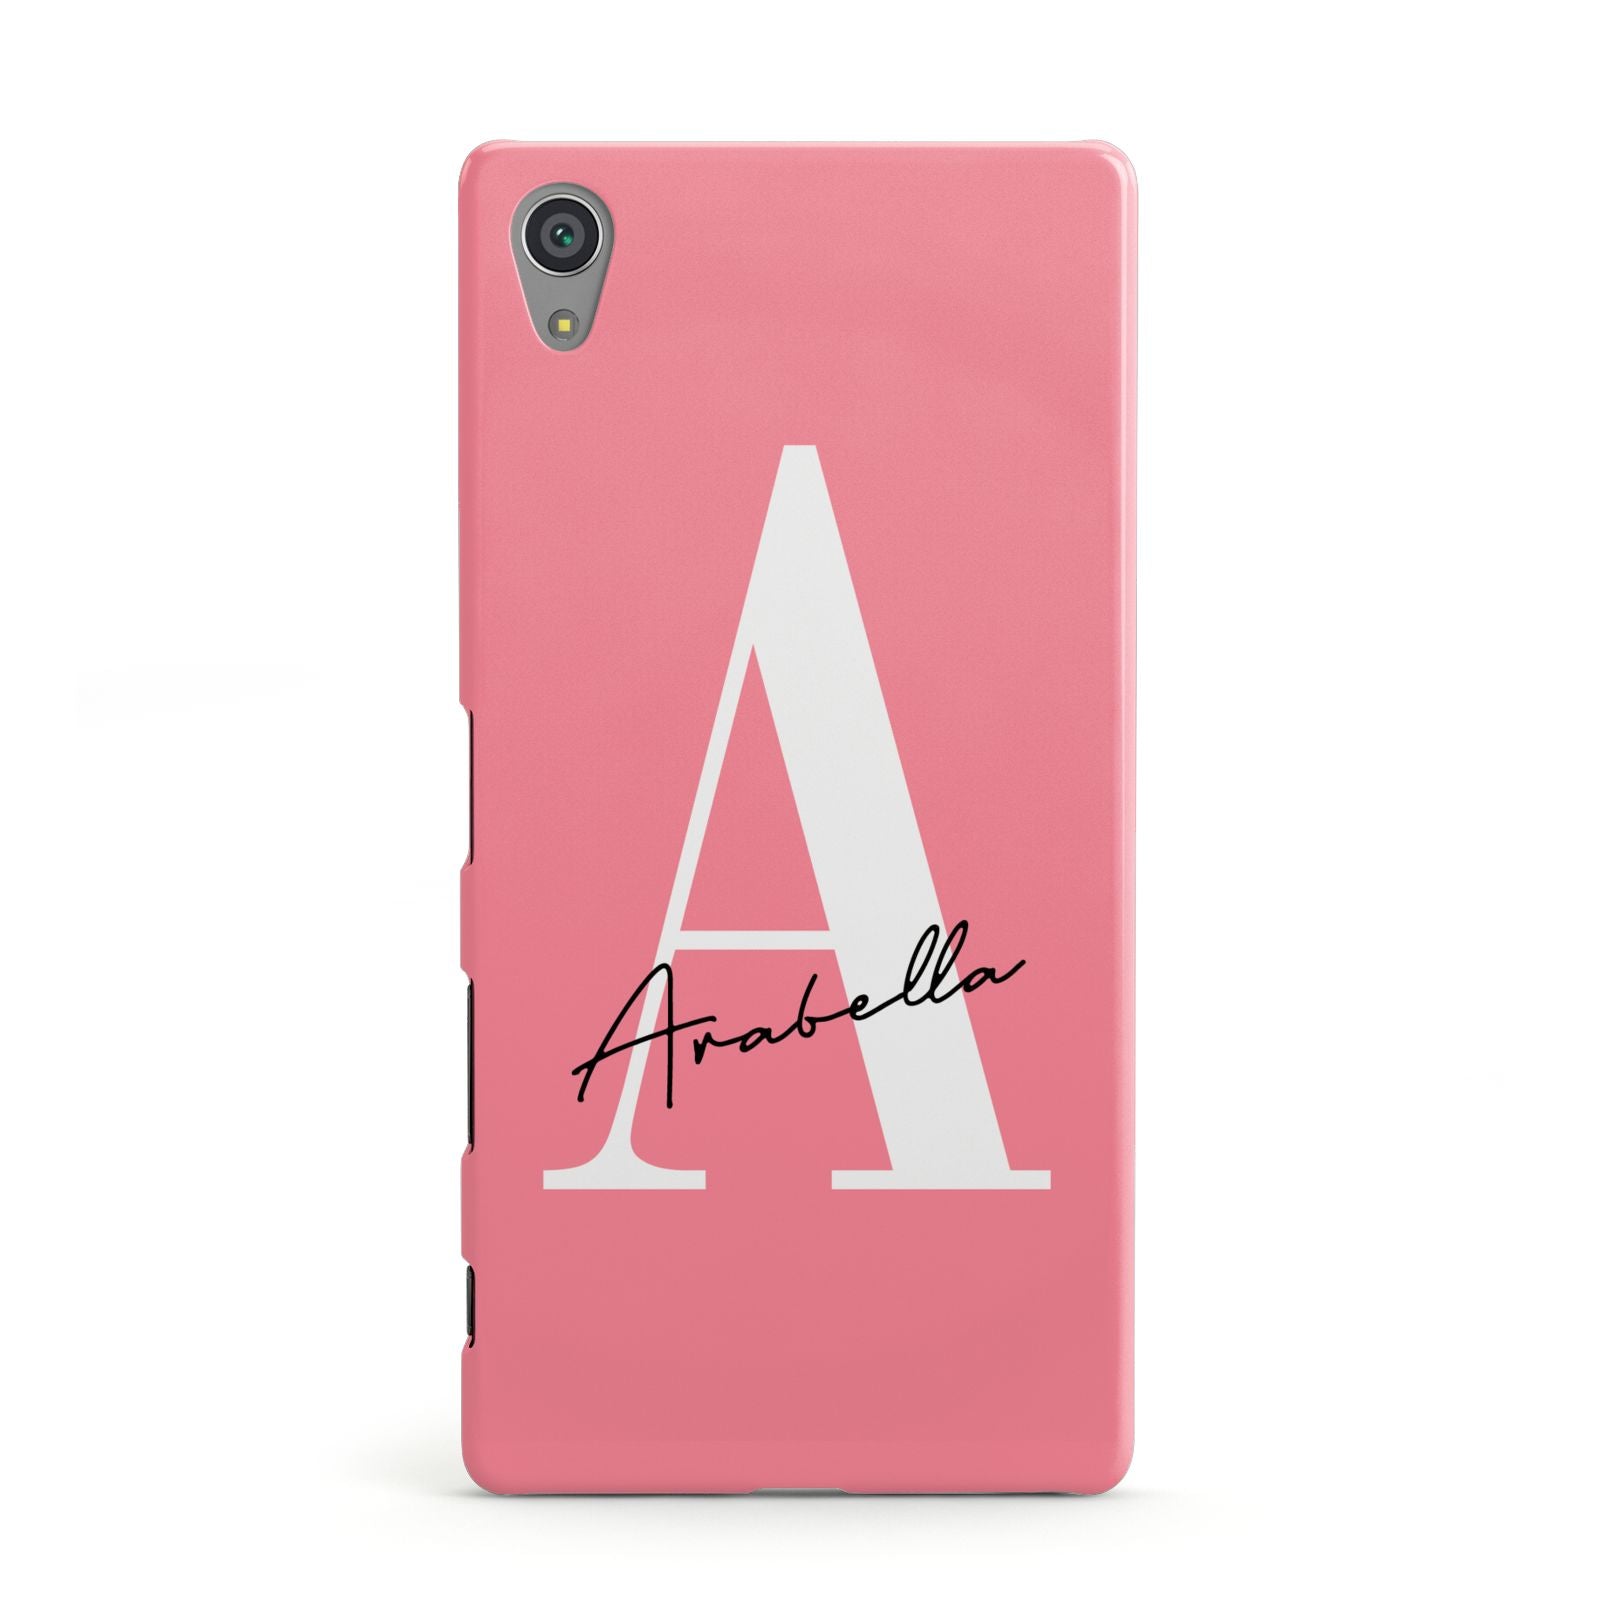 Personalised Pink White Initial Sony Xperia Case